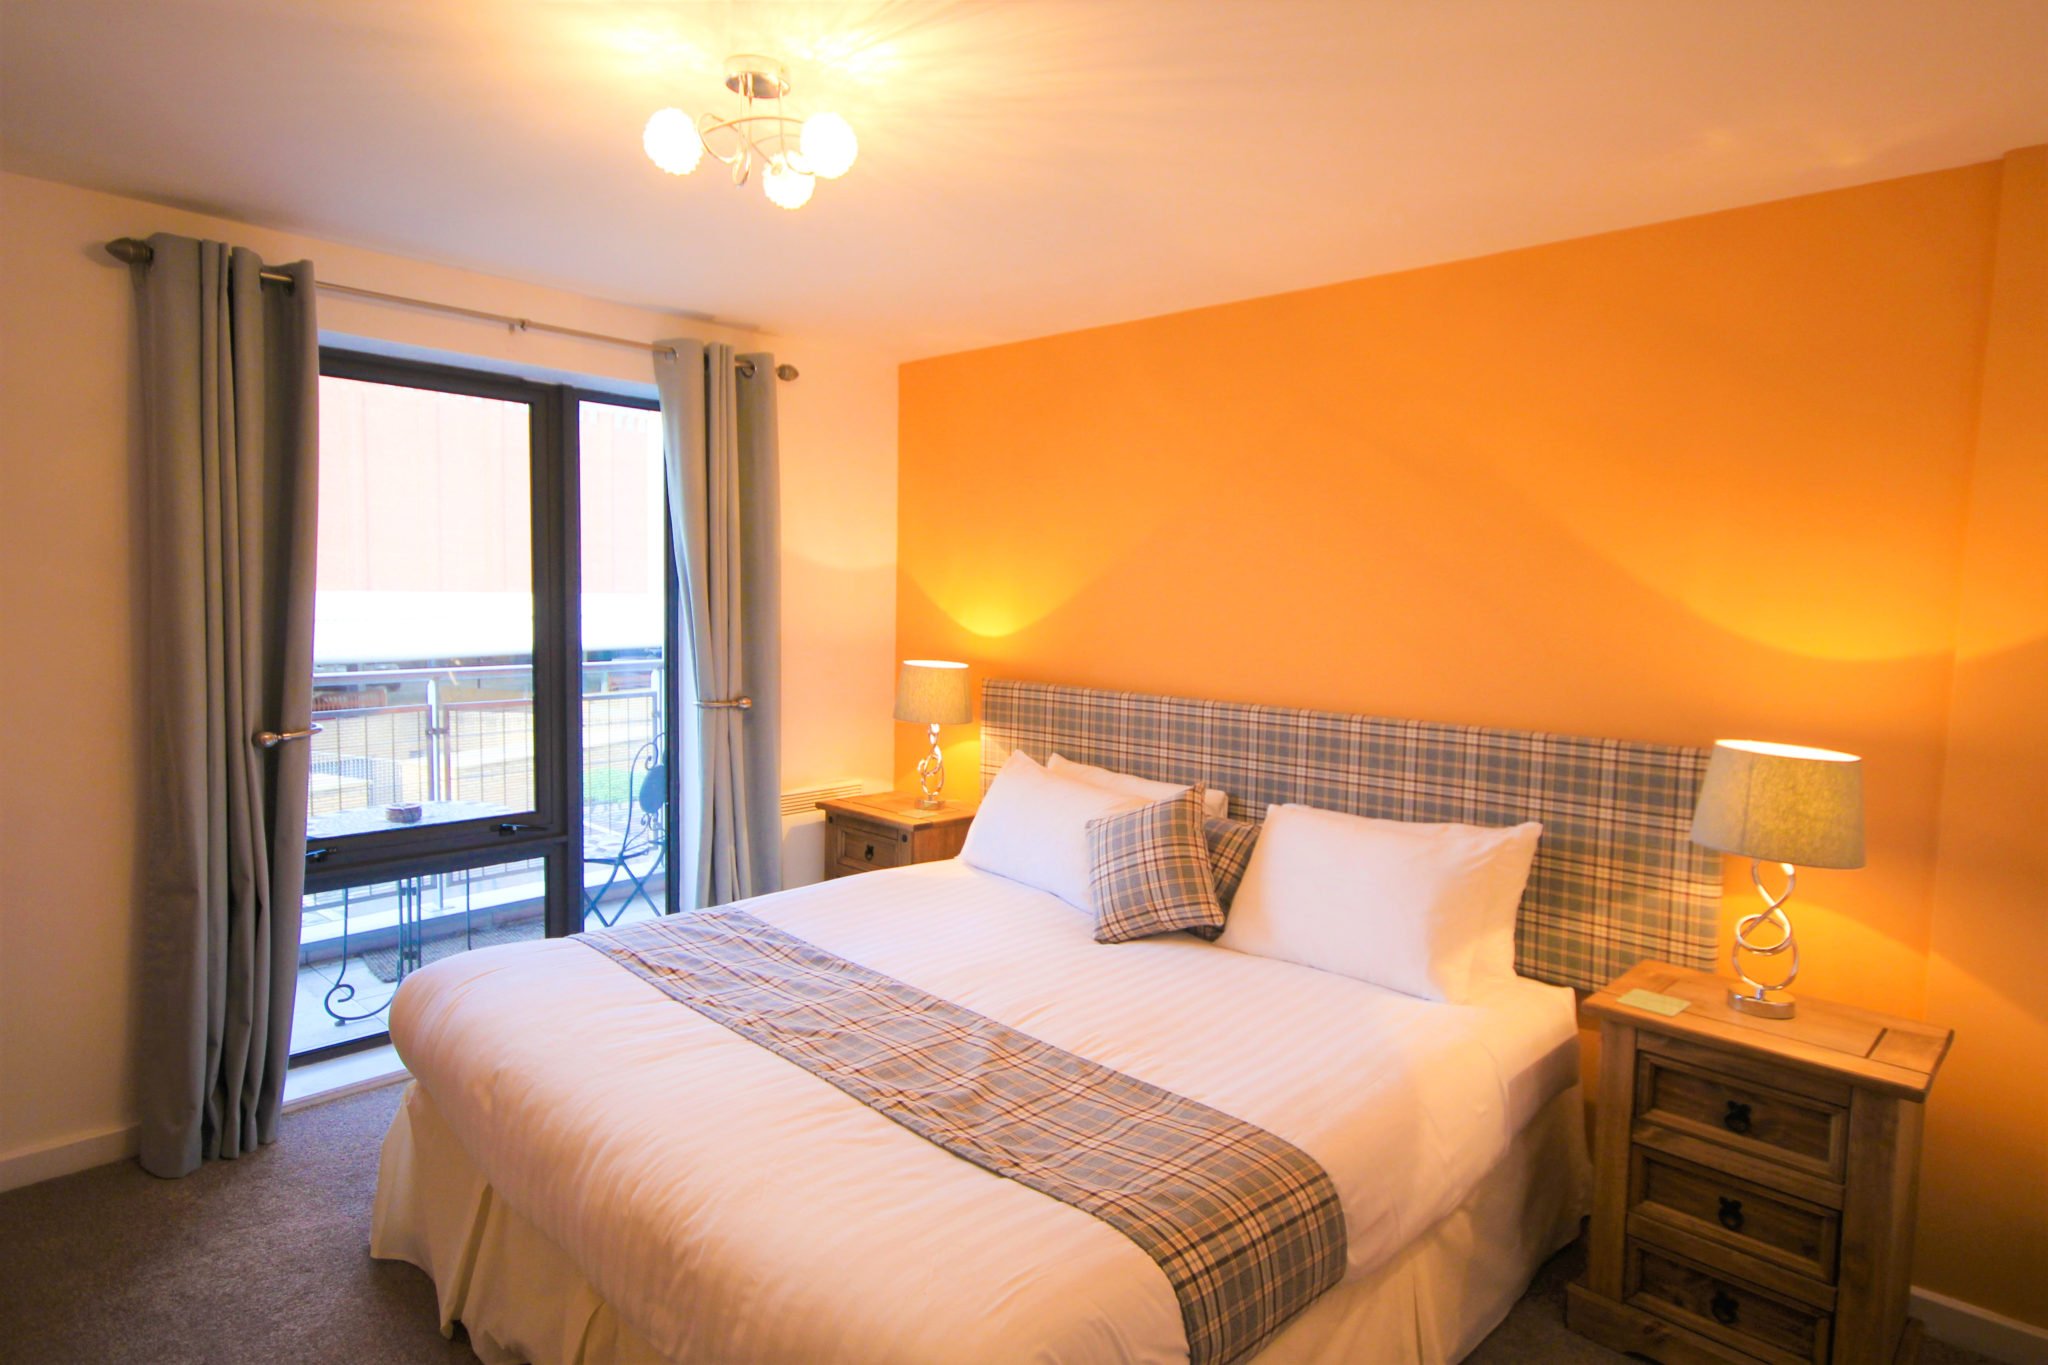 Newcastle Short Let Accommodation UK available Now! Book Corporate Serviced Apartments in North East England today! Parking,Wifi, 5* Service, All bills incl | Urban Stay